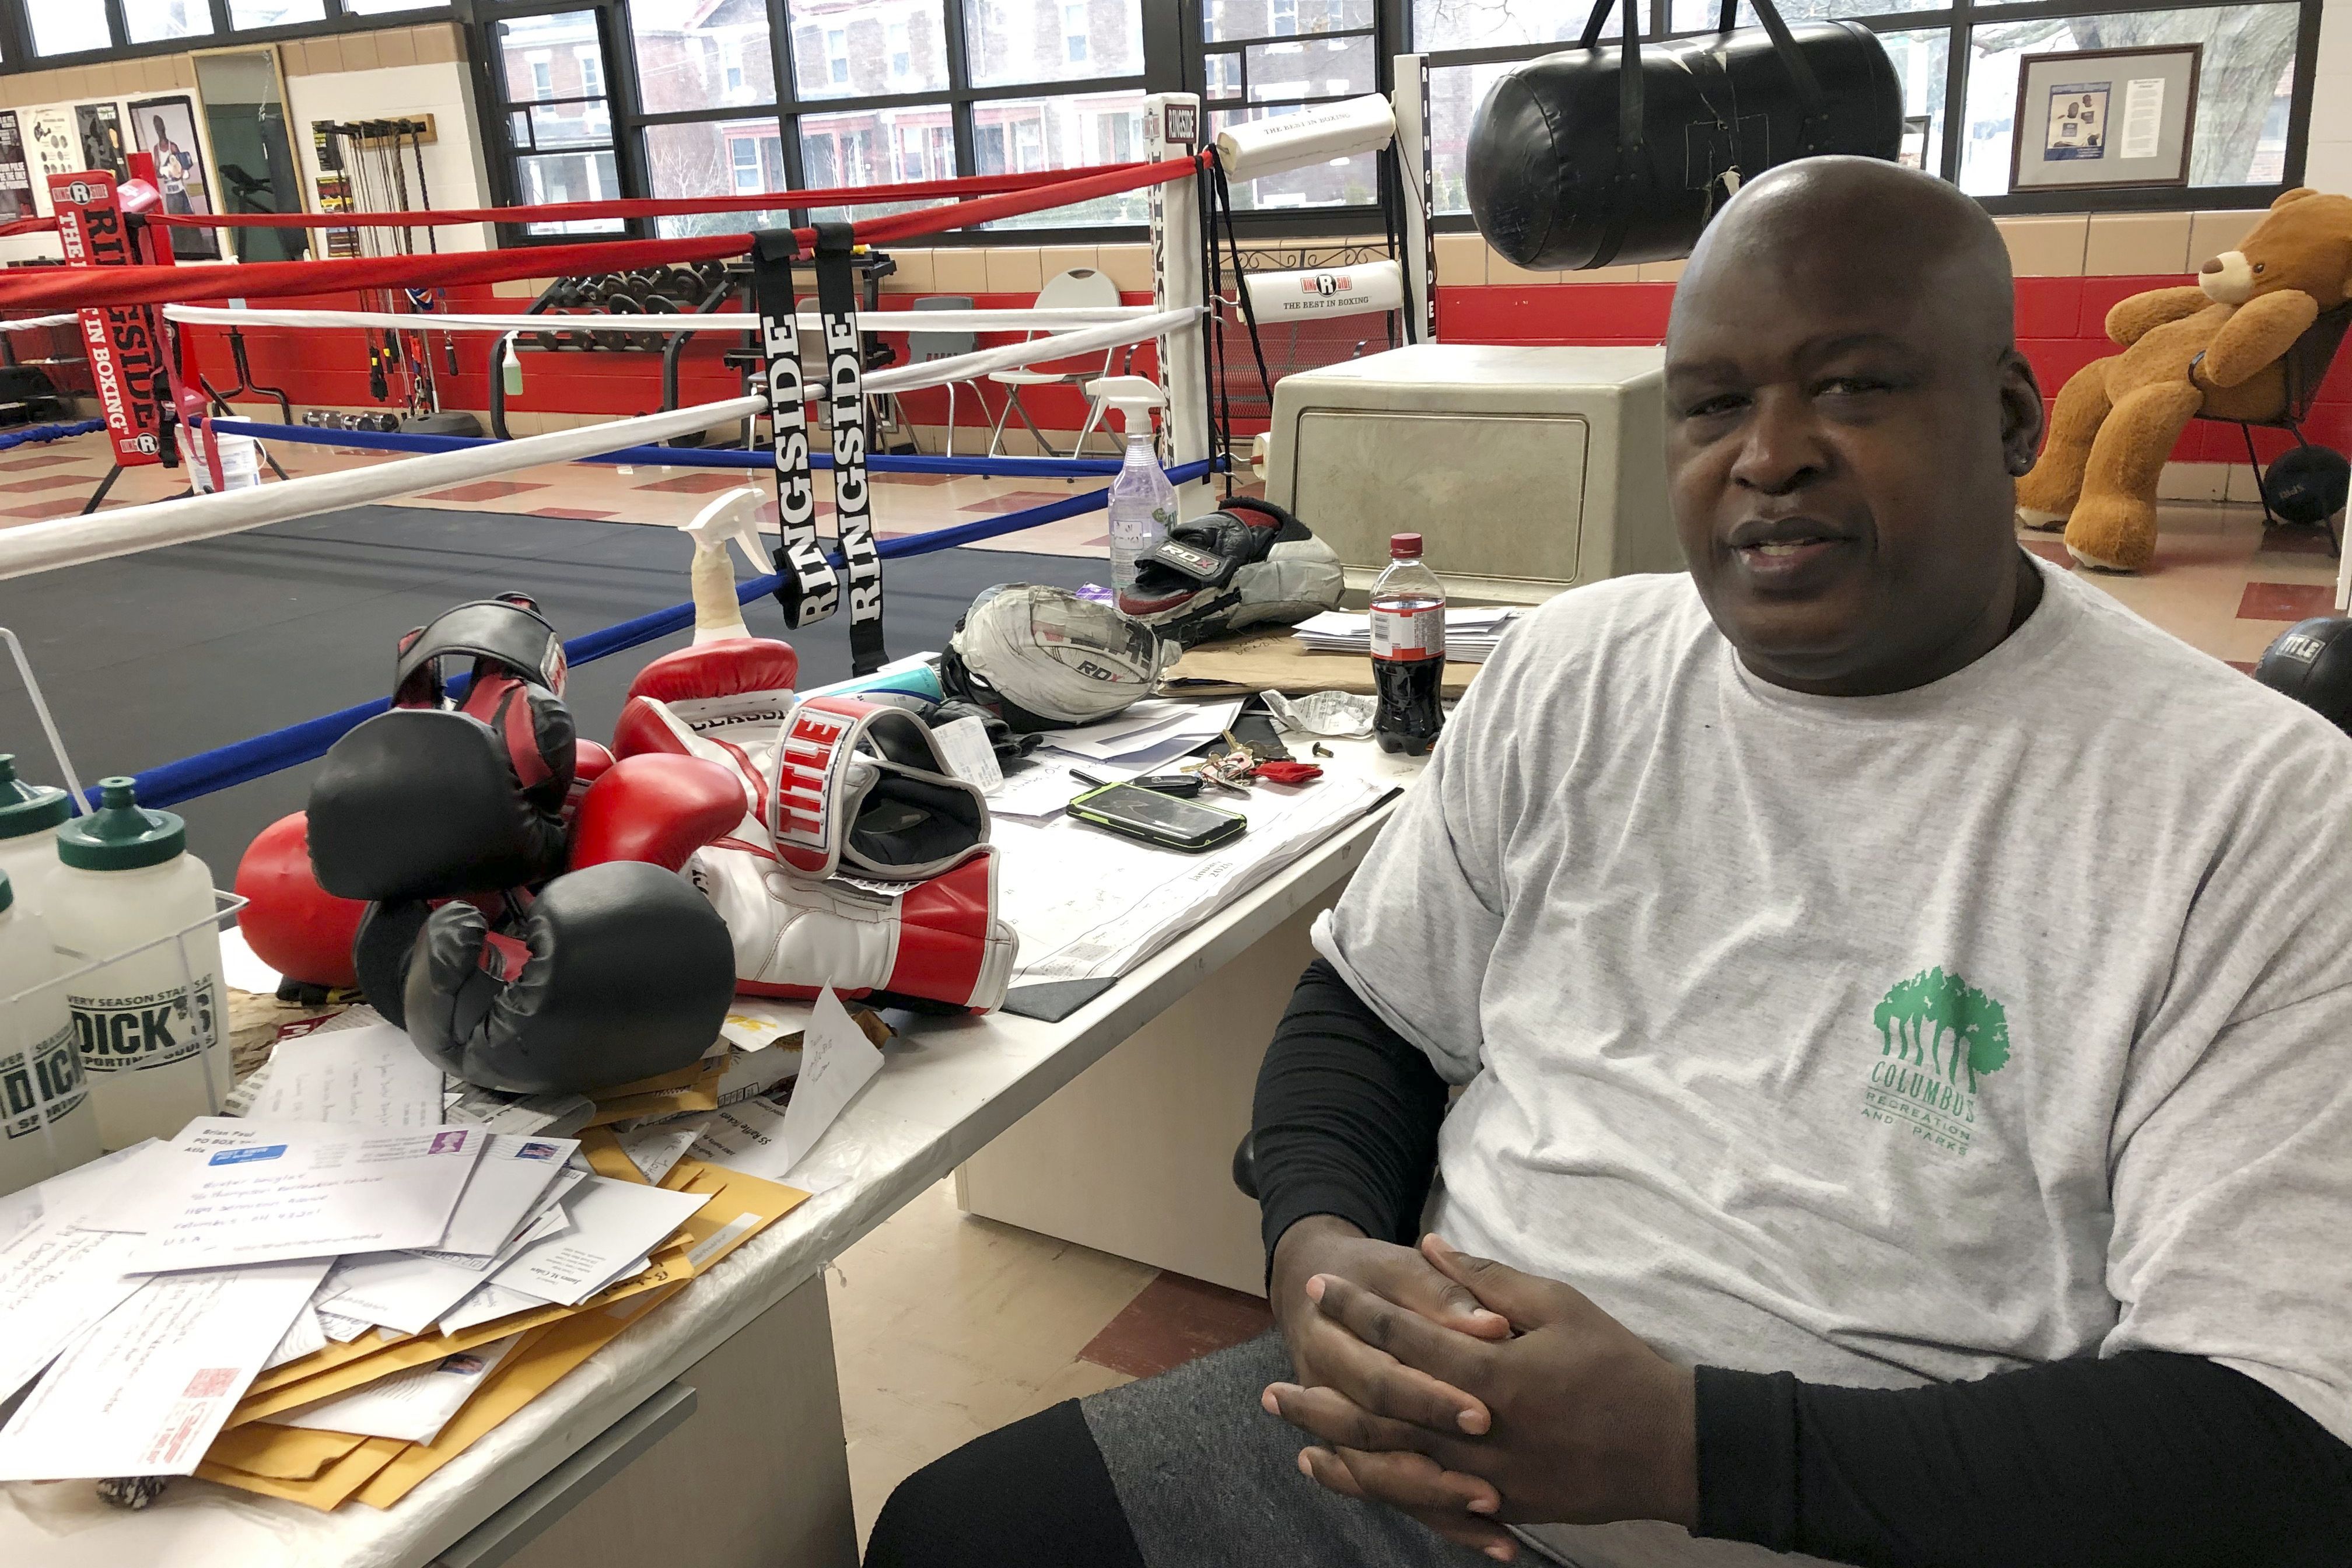 Thompson Community Center Boxing and James “Buster” Douglas